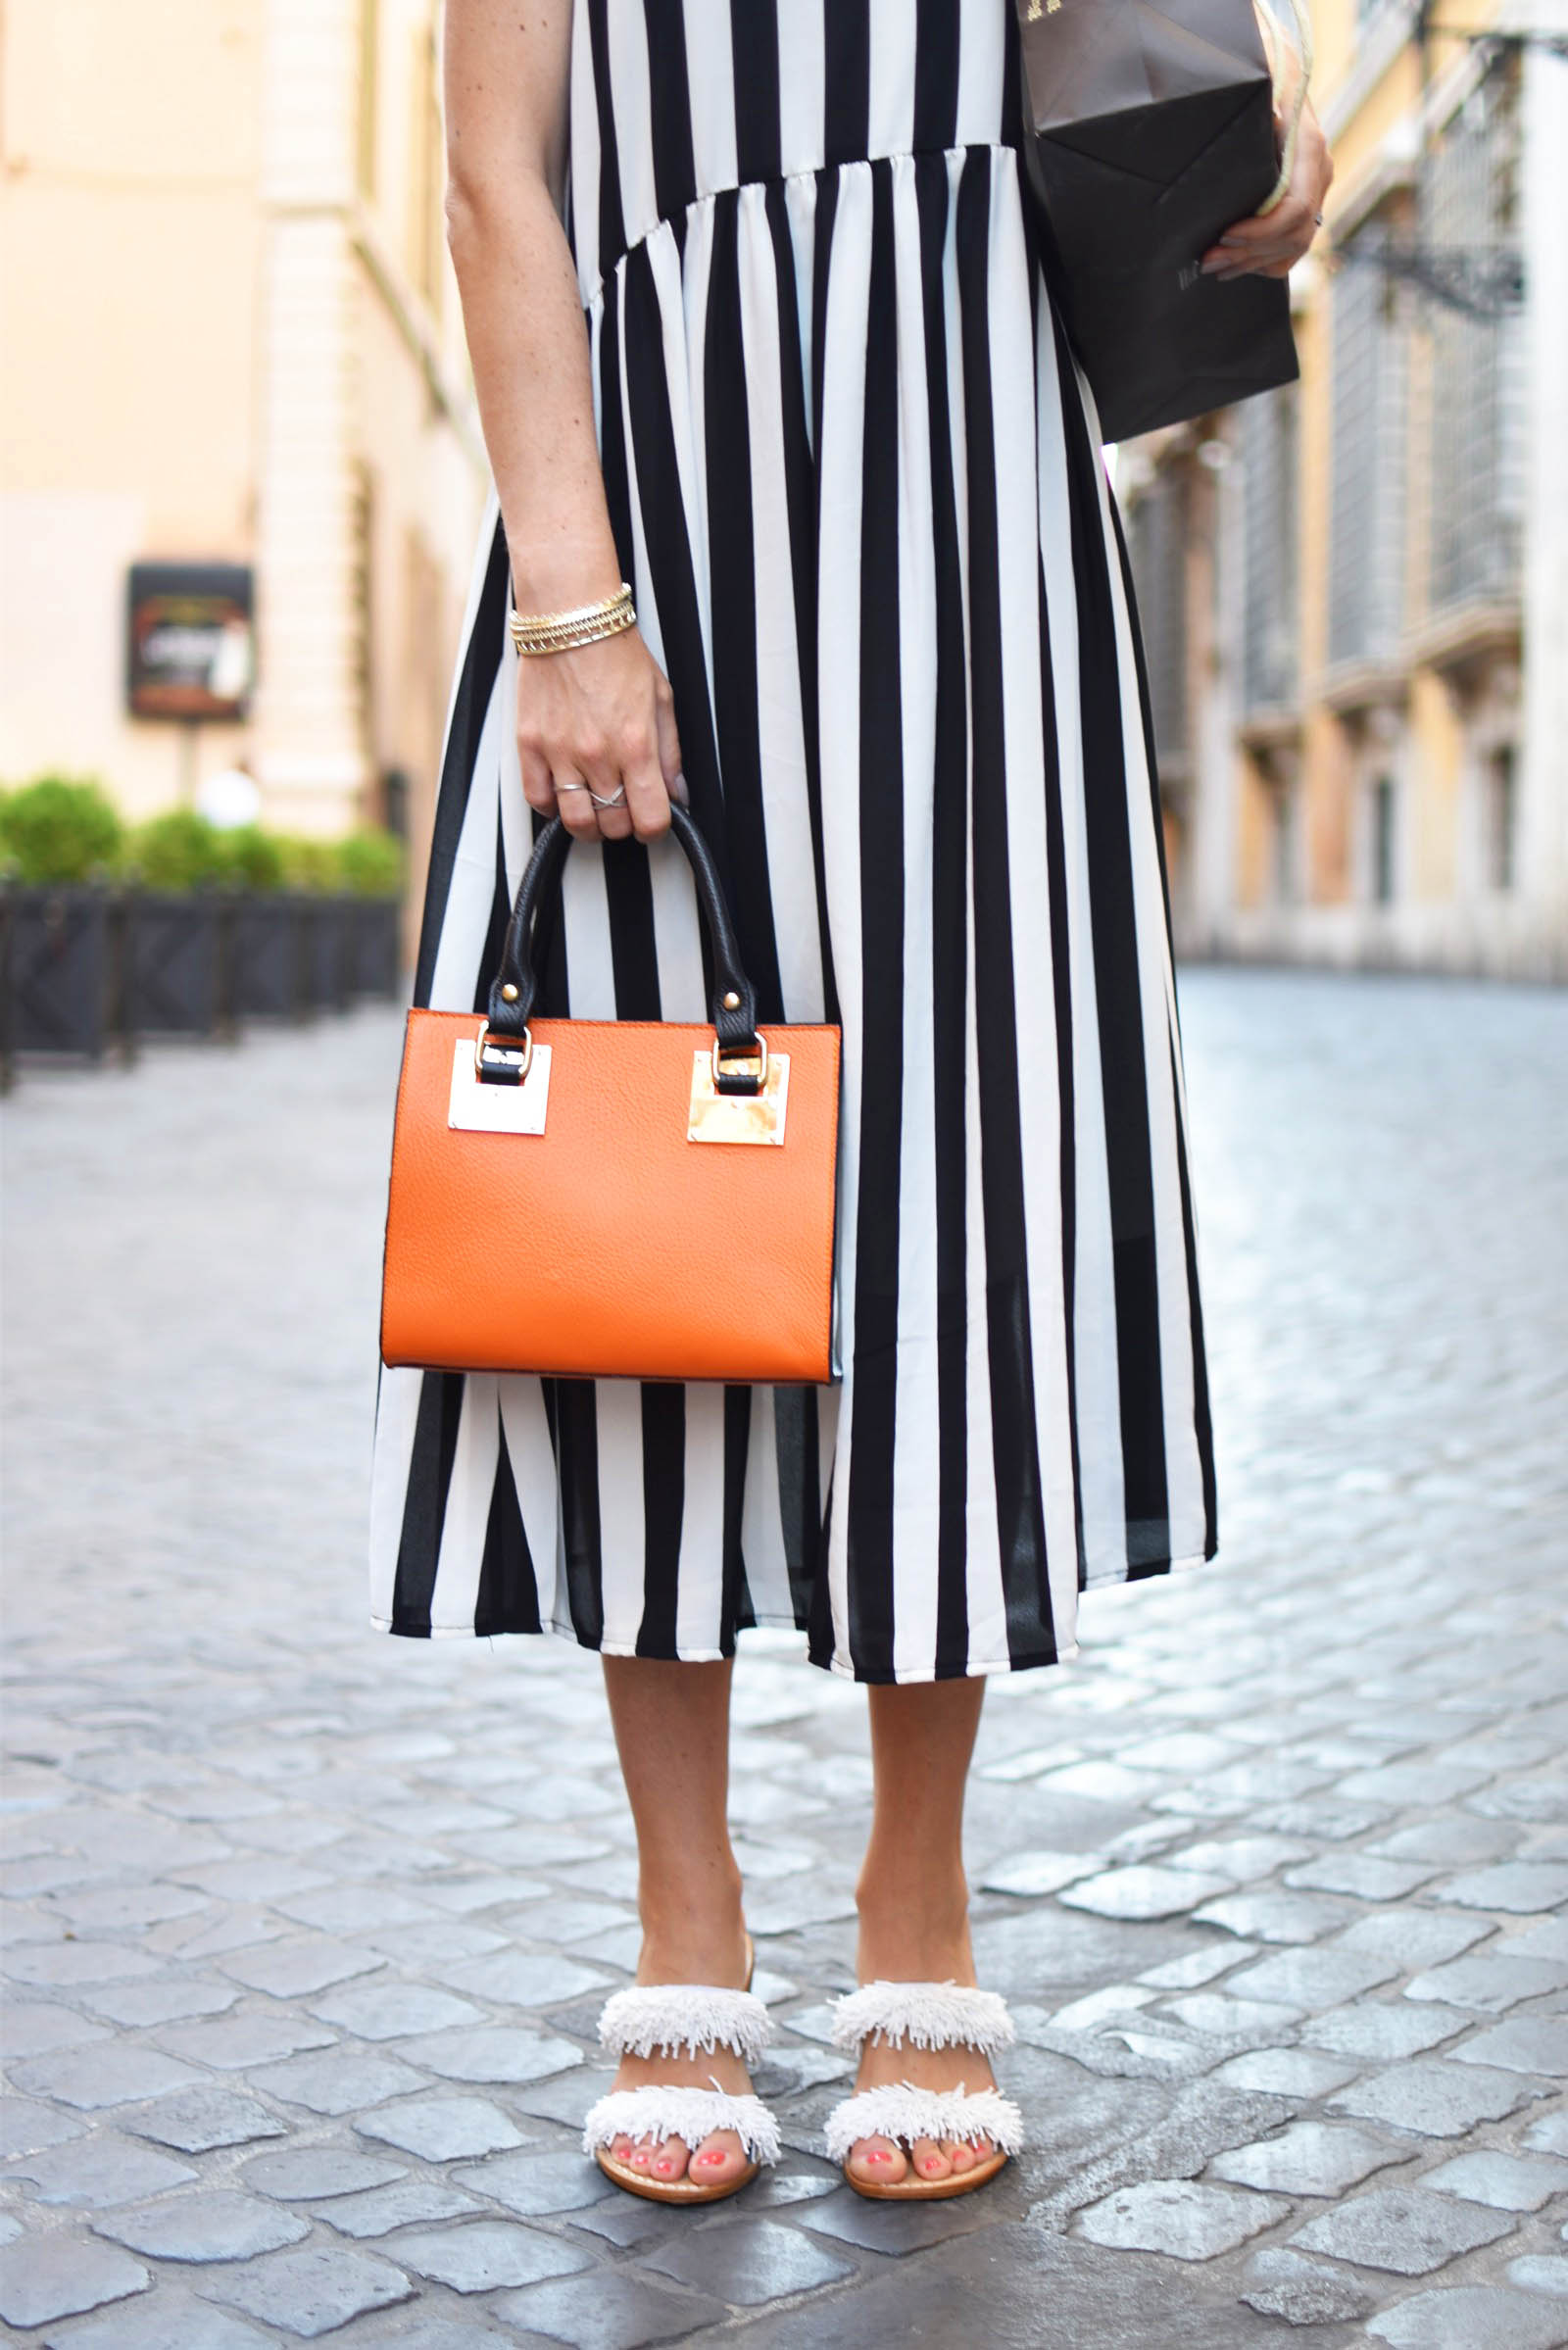 black and white striped dress and orange italian leather bag in Rome